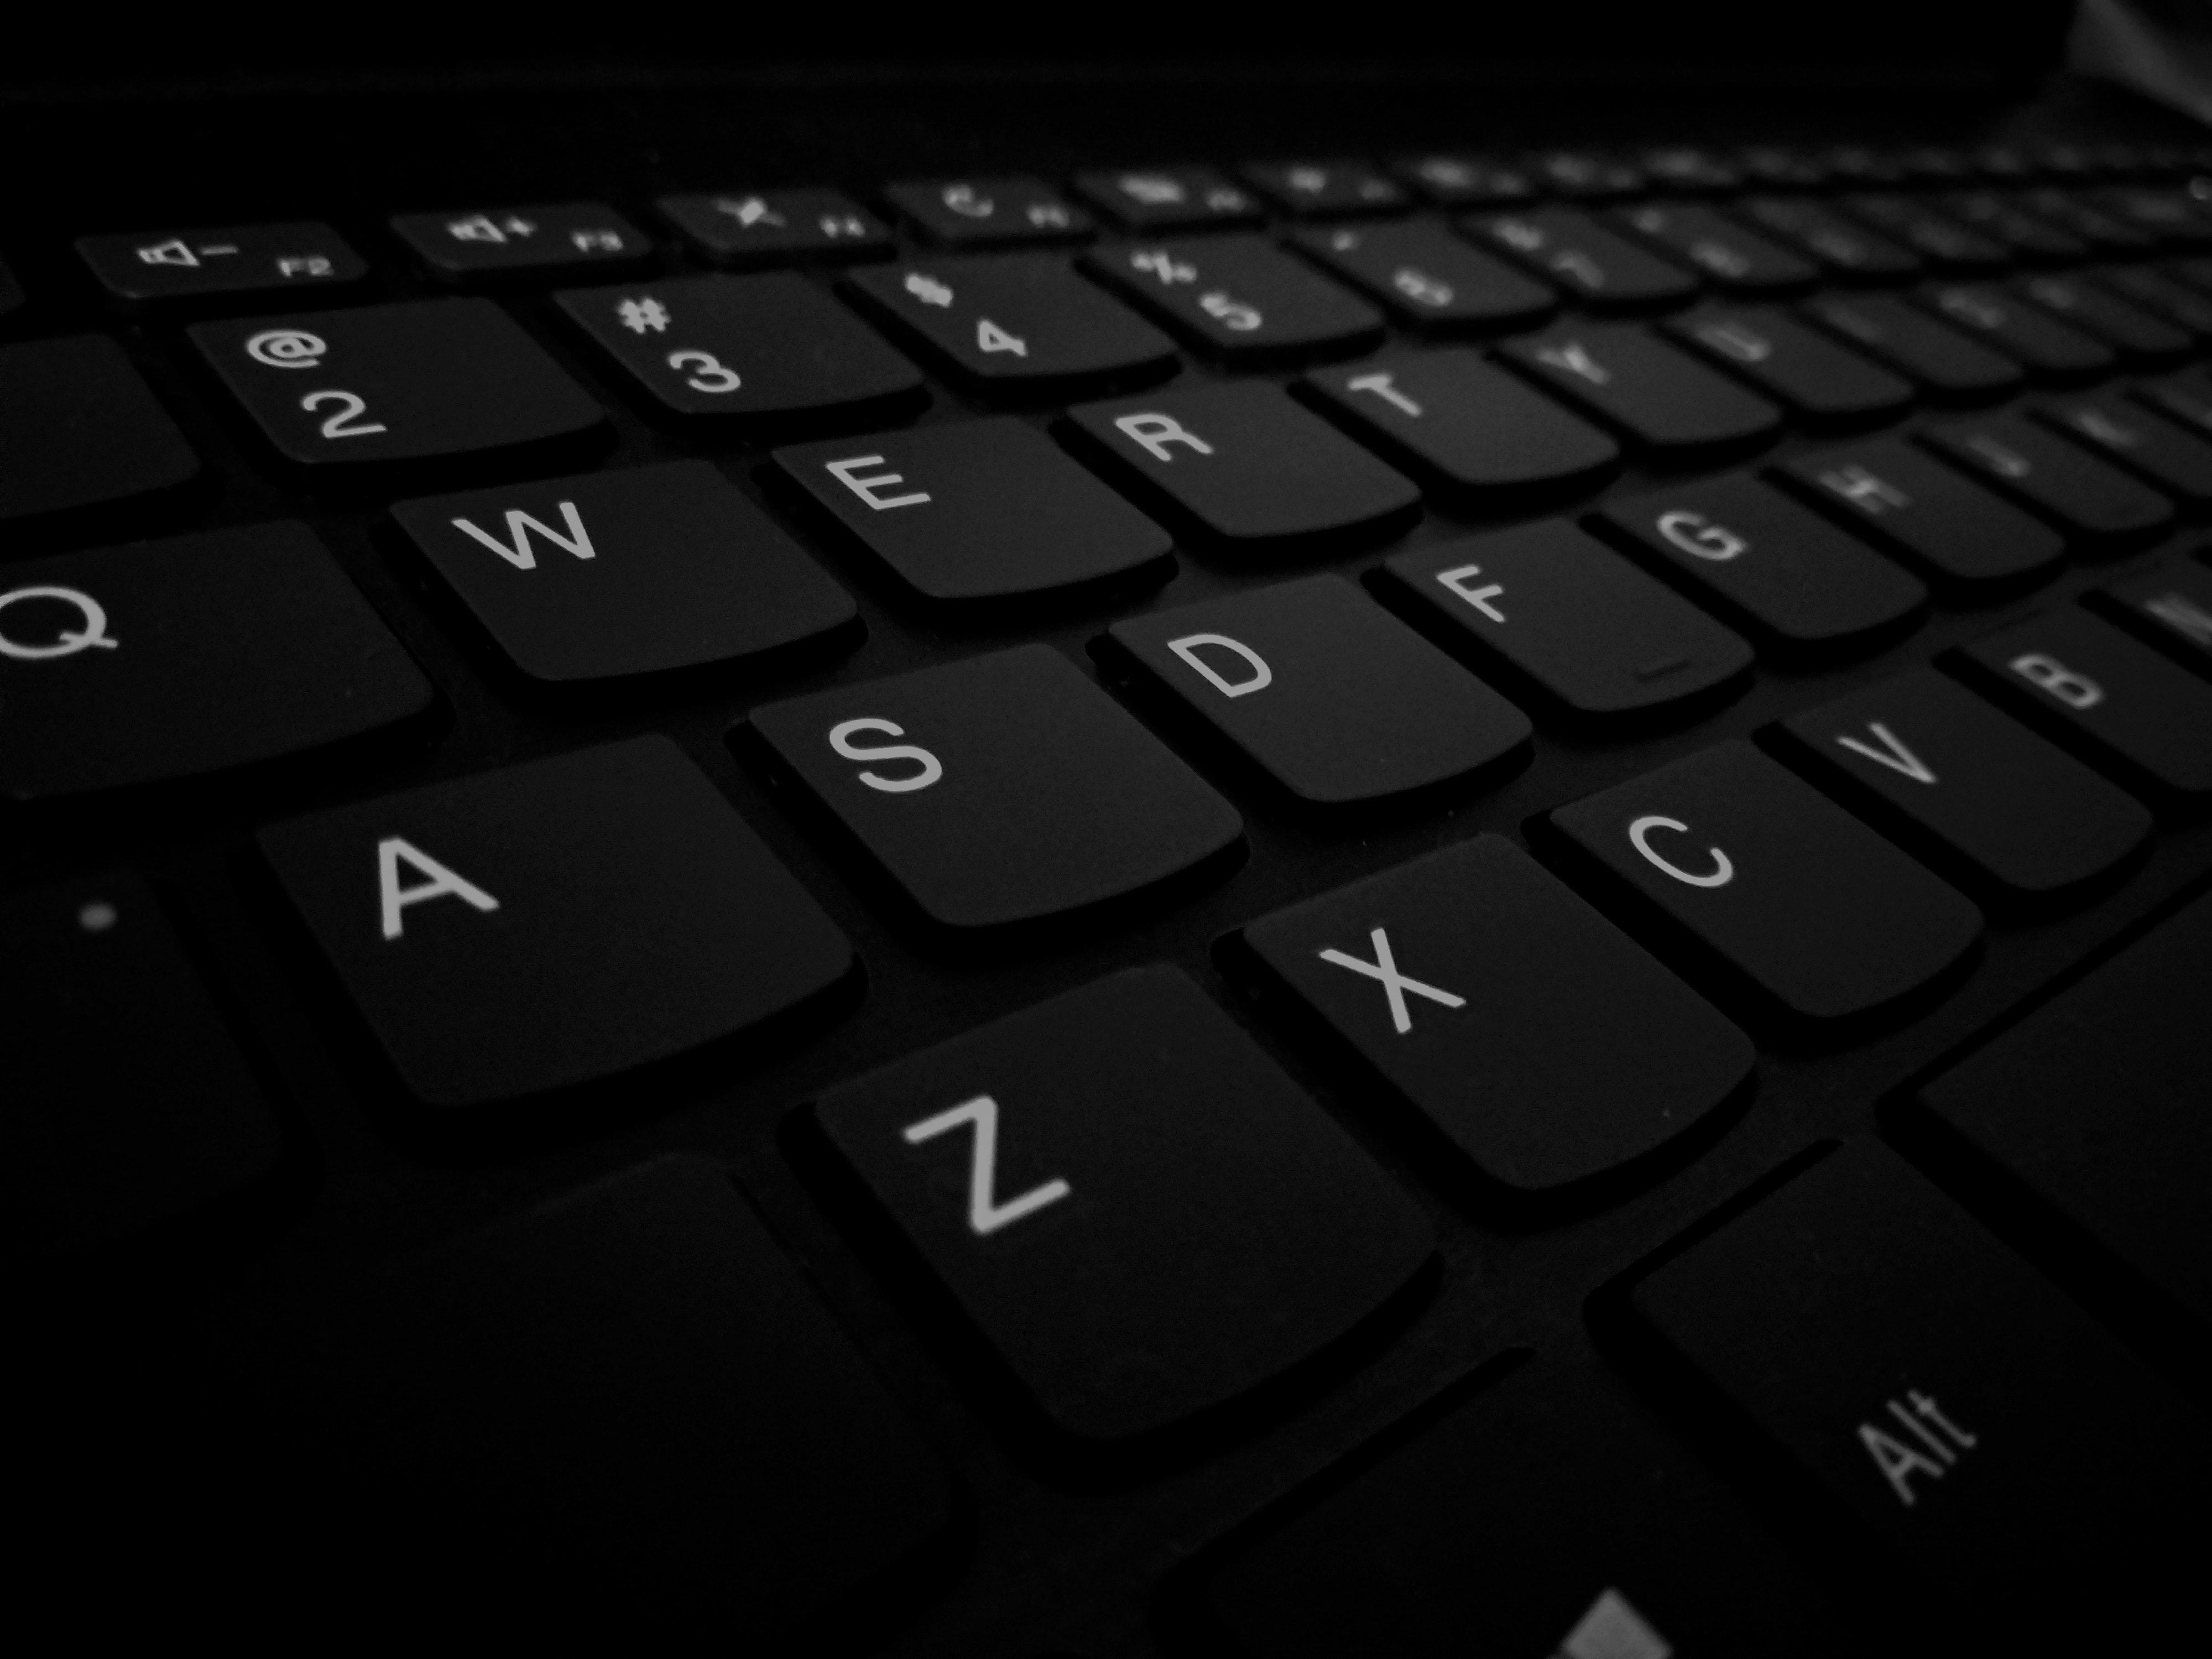 Keyboard wallpapers hd, desktop backgrounds, images and pictures